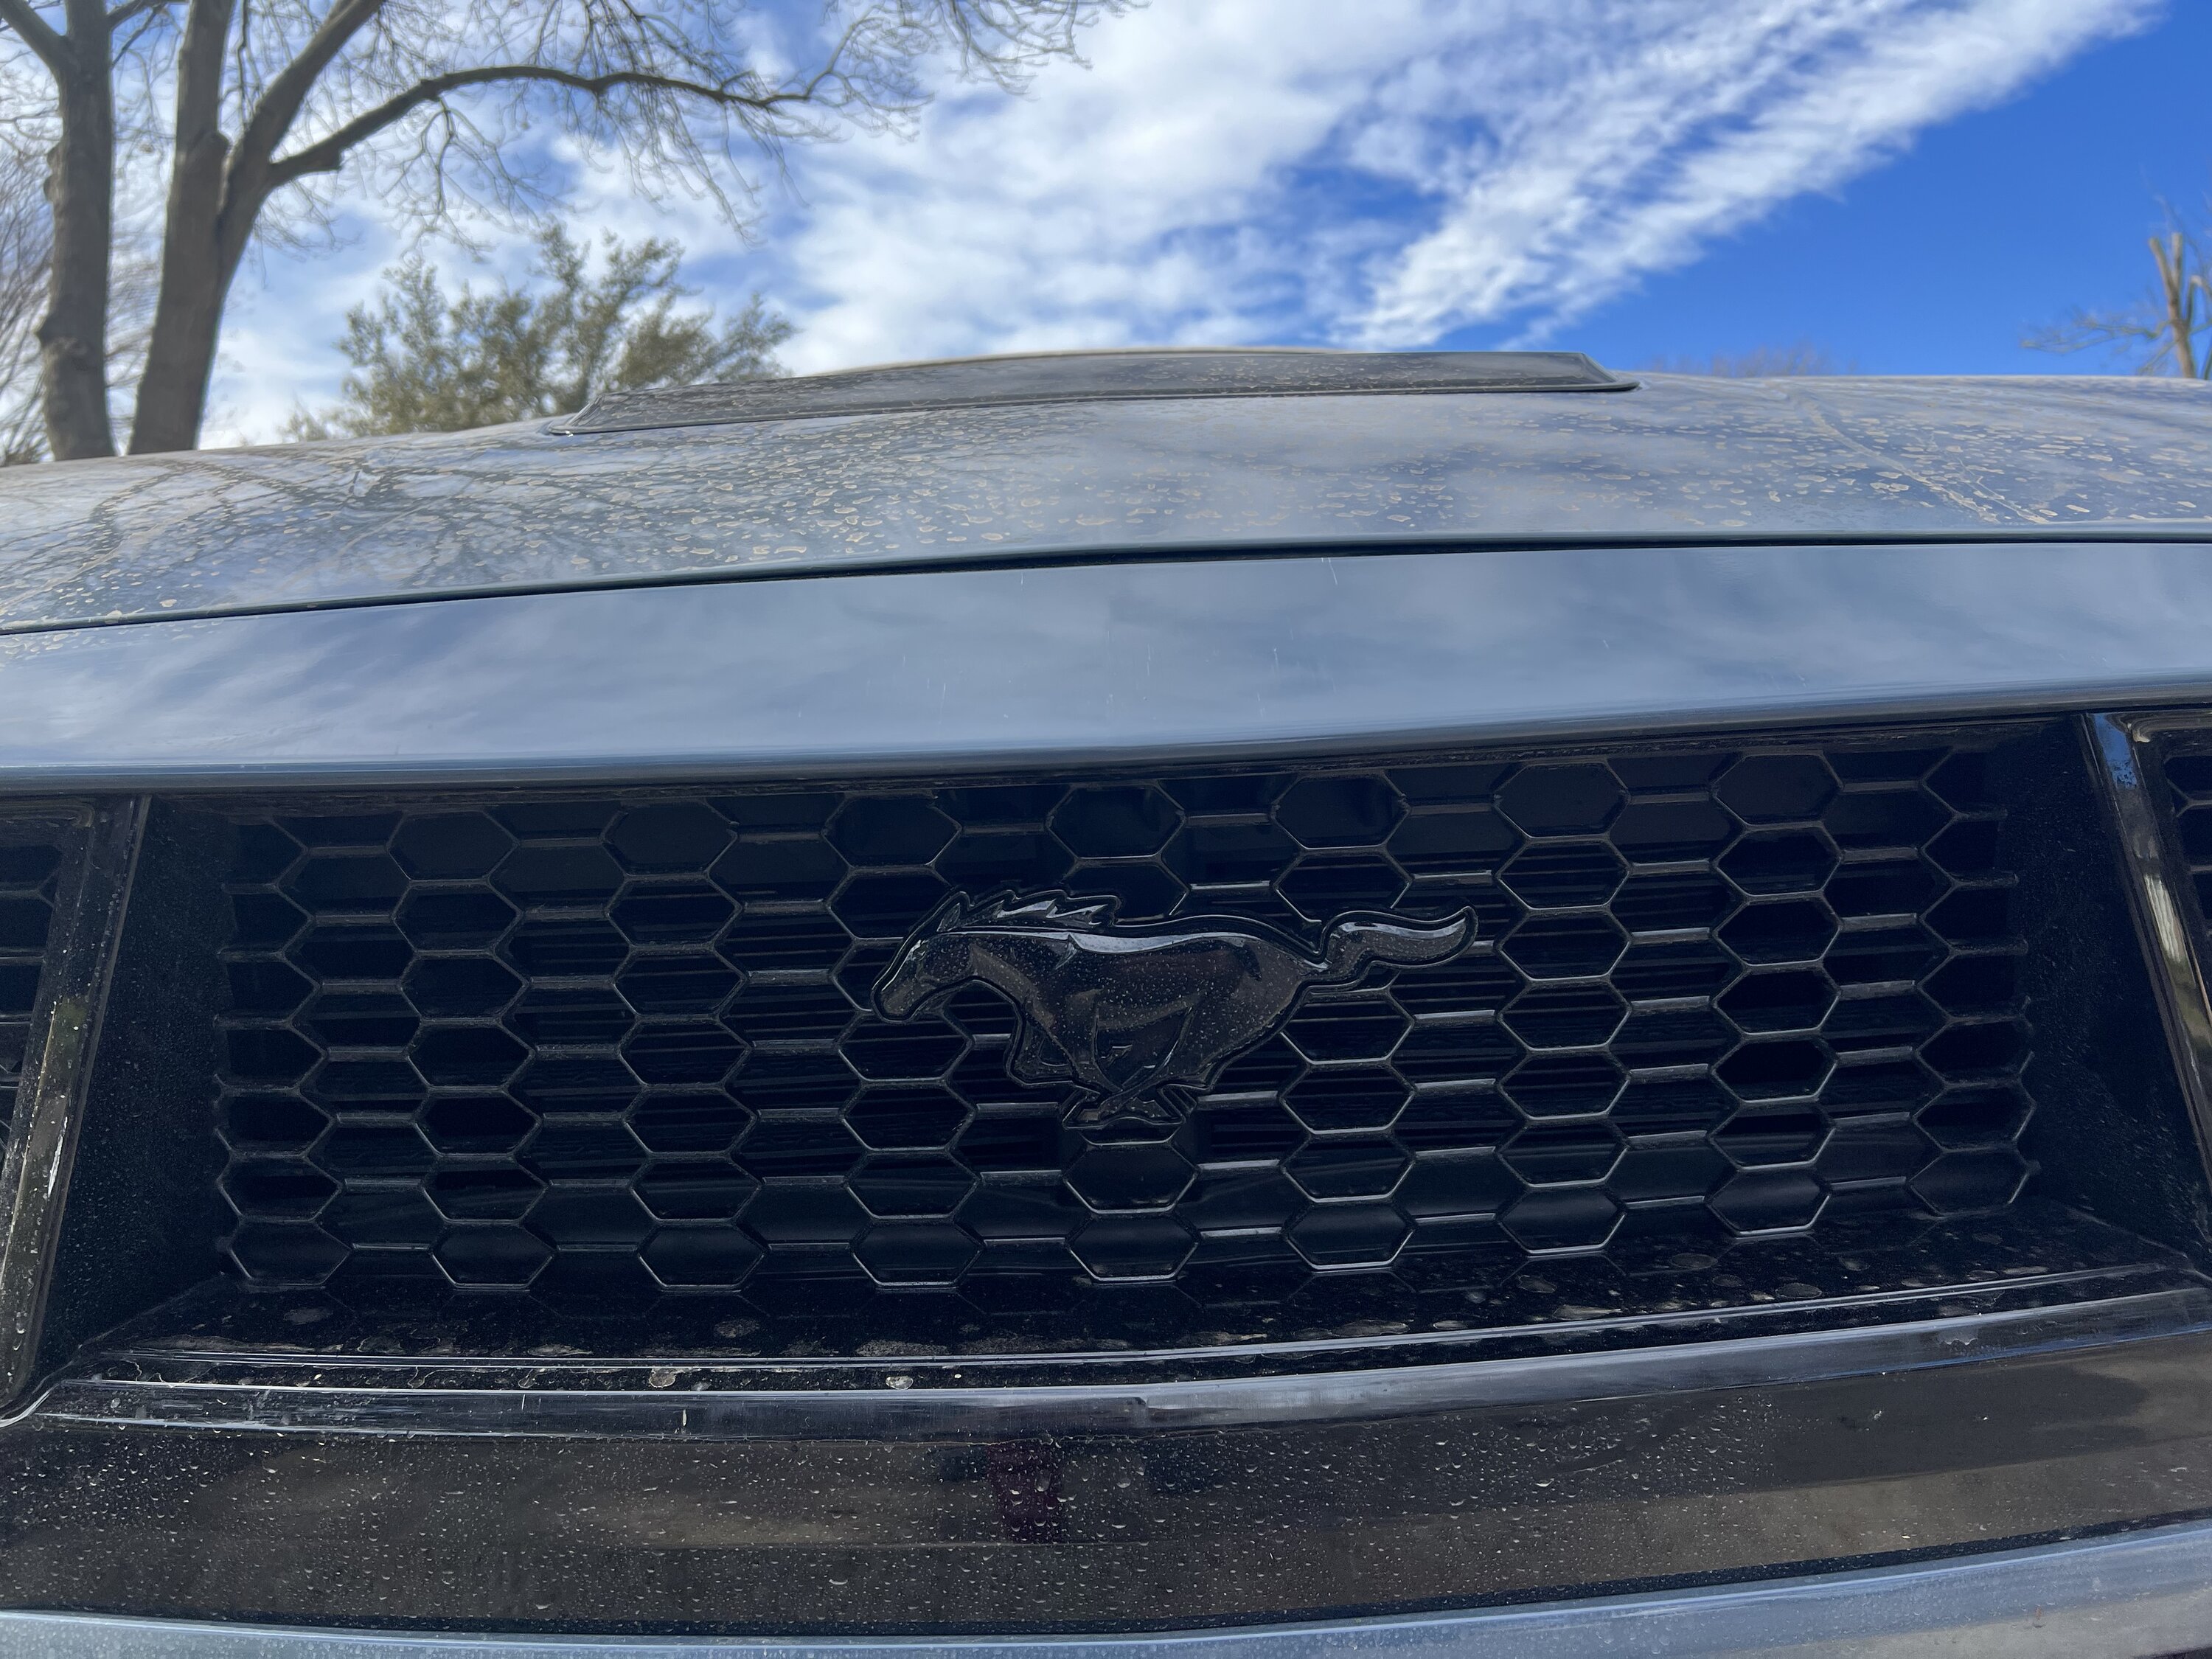 S650 Mustang Got backed into, how bad does the damage look? Next steps? IMG_6766